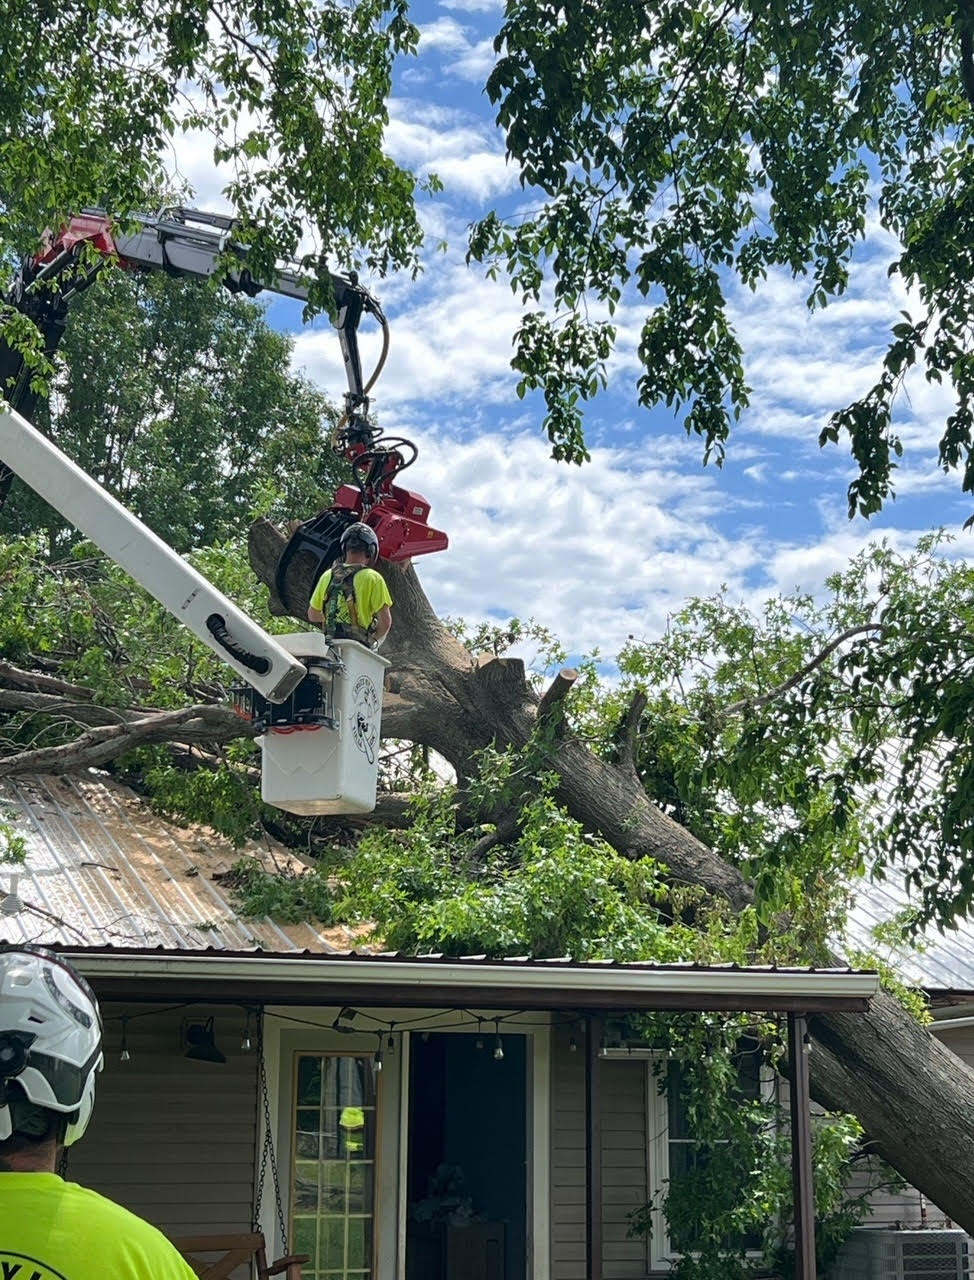 A worker in a bucket truck uses a chainsaw to cut a large fallen tree on a metal roof of a house. Another person in hi-vis attire stands below. The sky is partly cloudy.